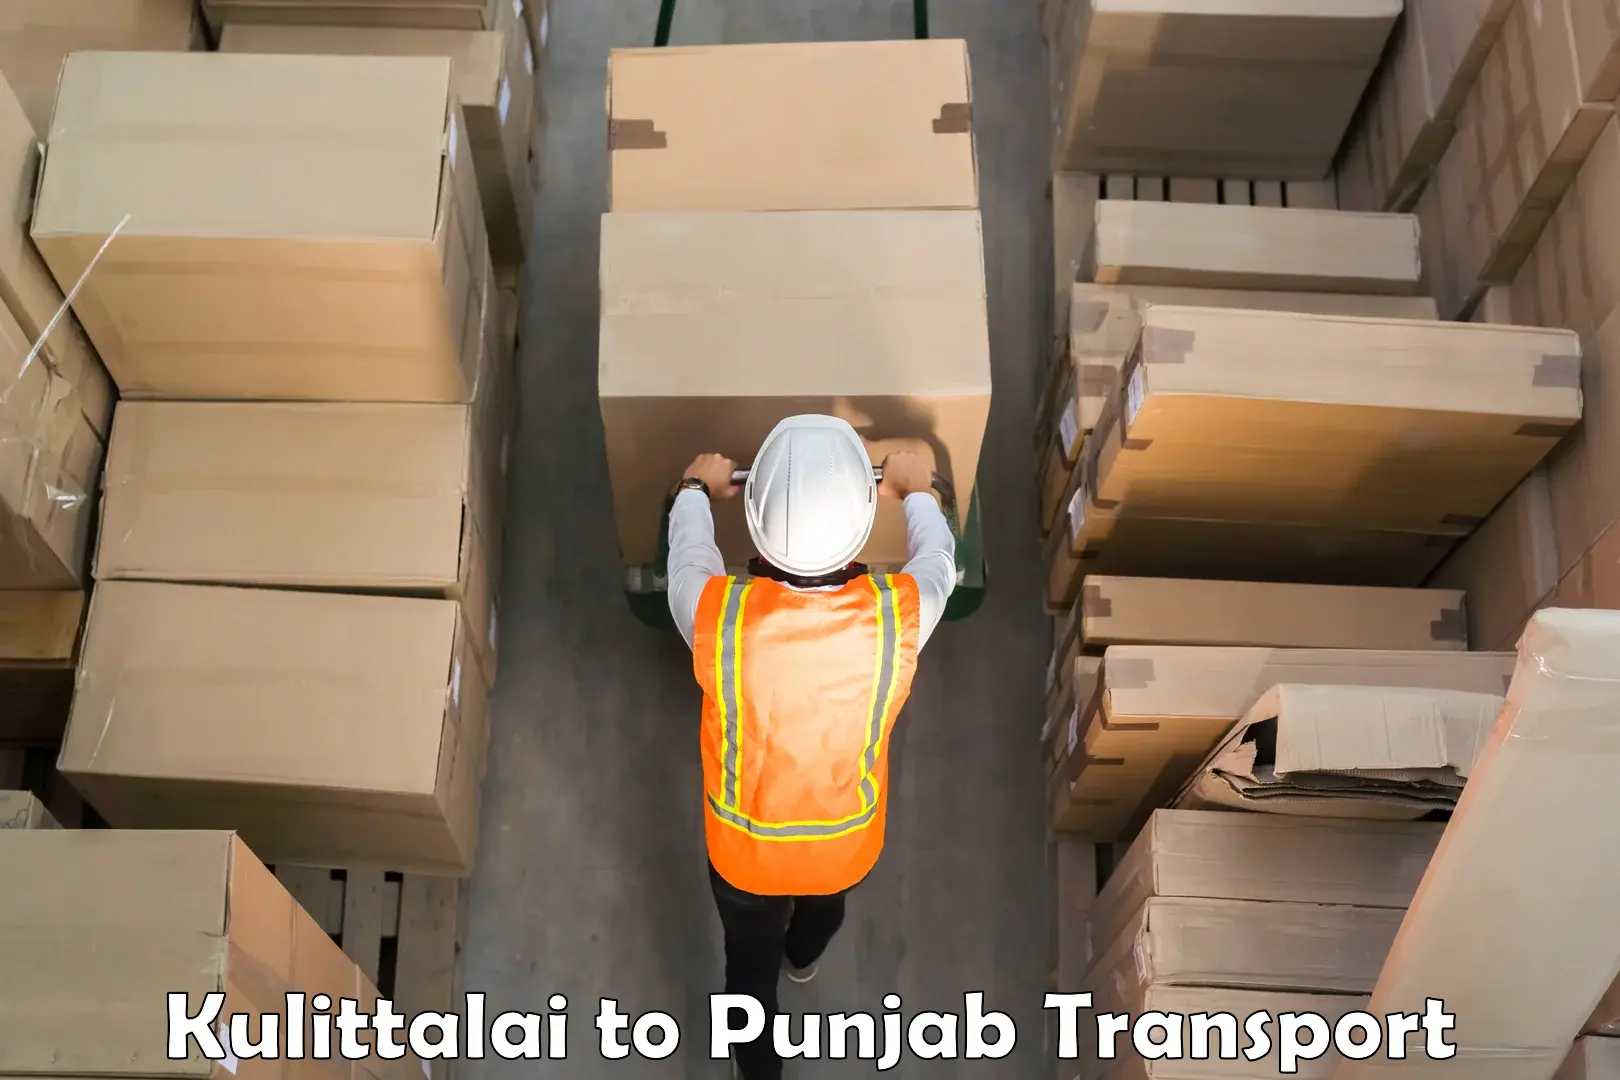 Cargo transportation services Kulittalai to Sultanpur Lodhi